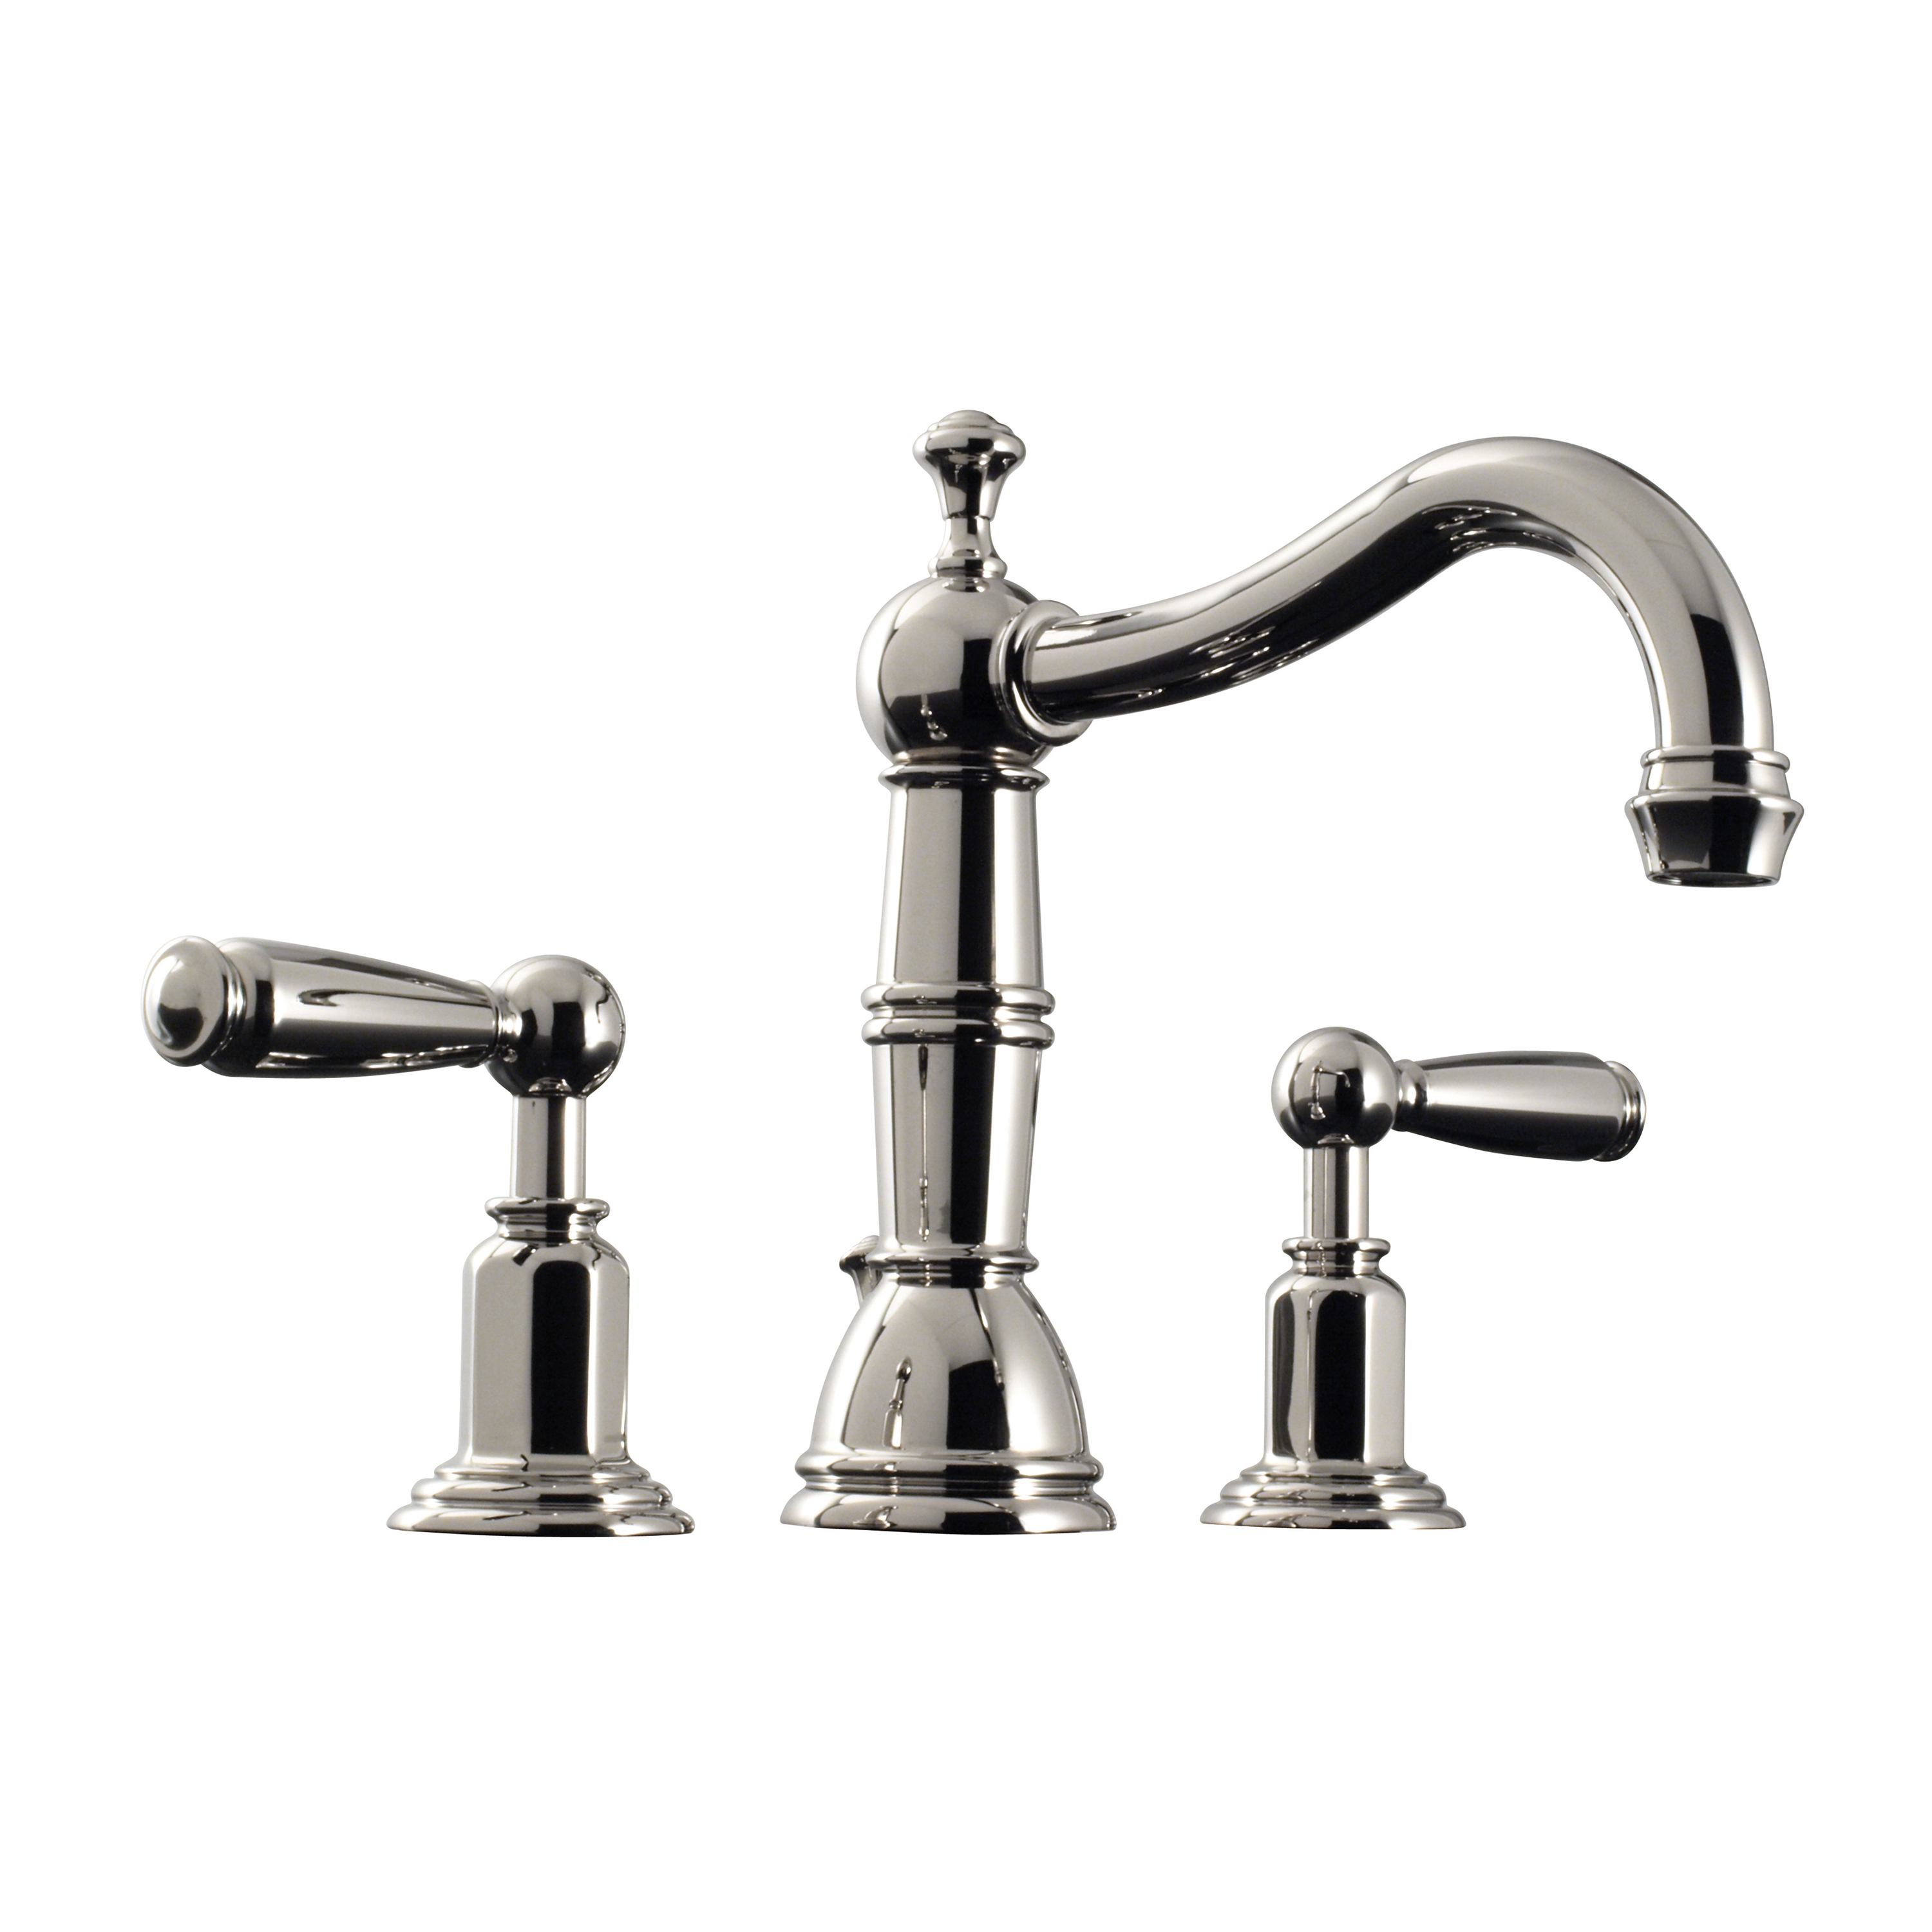 Santec 2920EY10 Vantage Widespread Lavatory Faucet with EY Handle - Polished Chrome - Click Image to Close